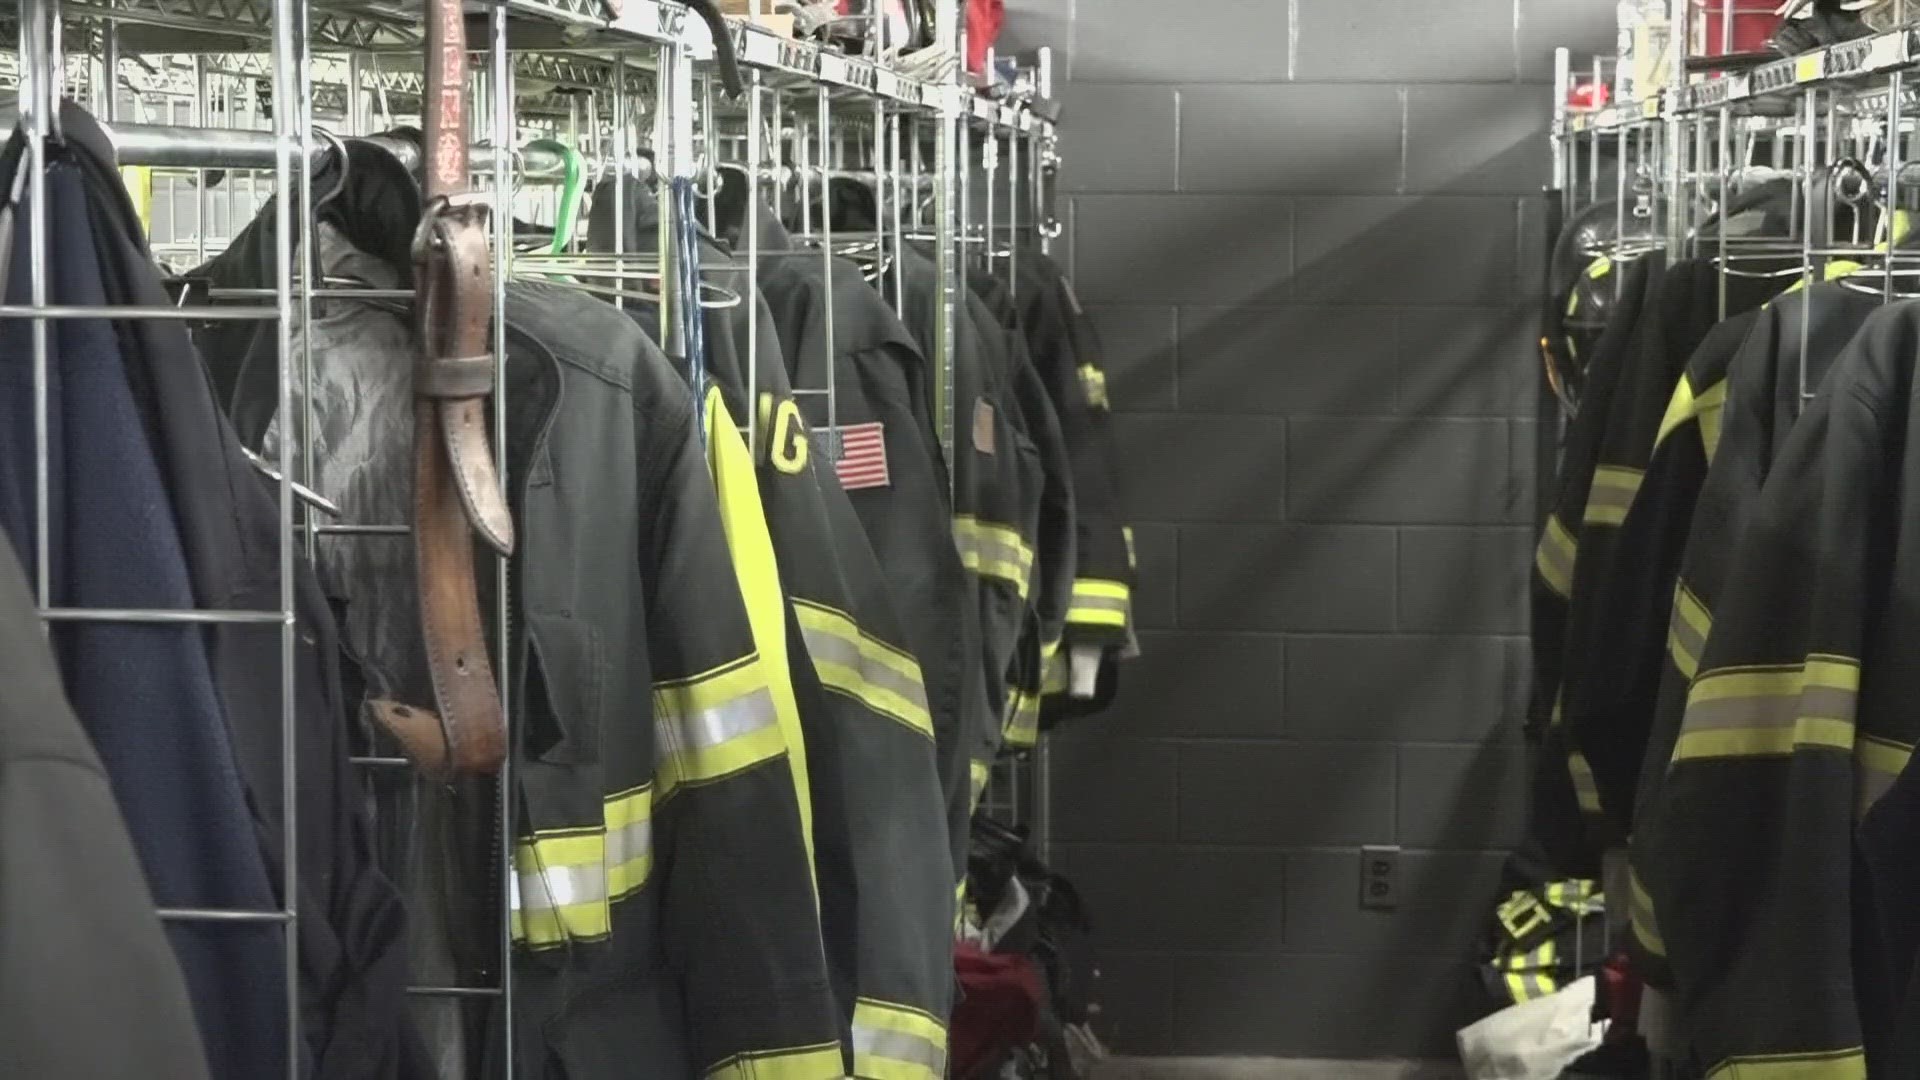 "Positive morale has become a thing of the past," one firefighter warned.